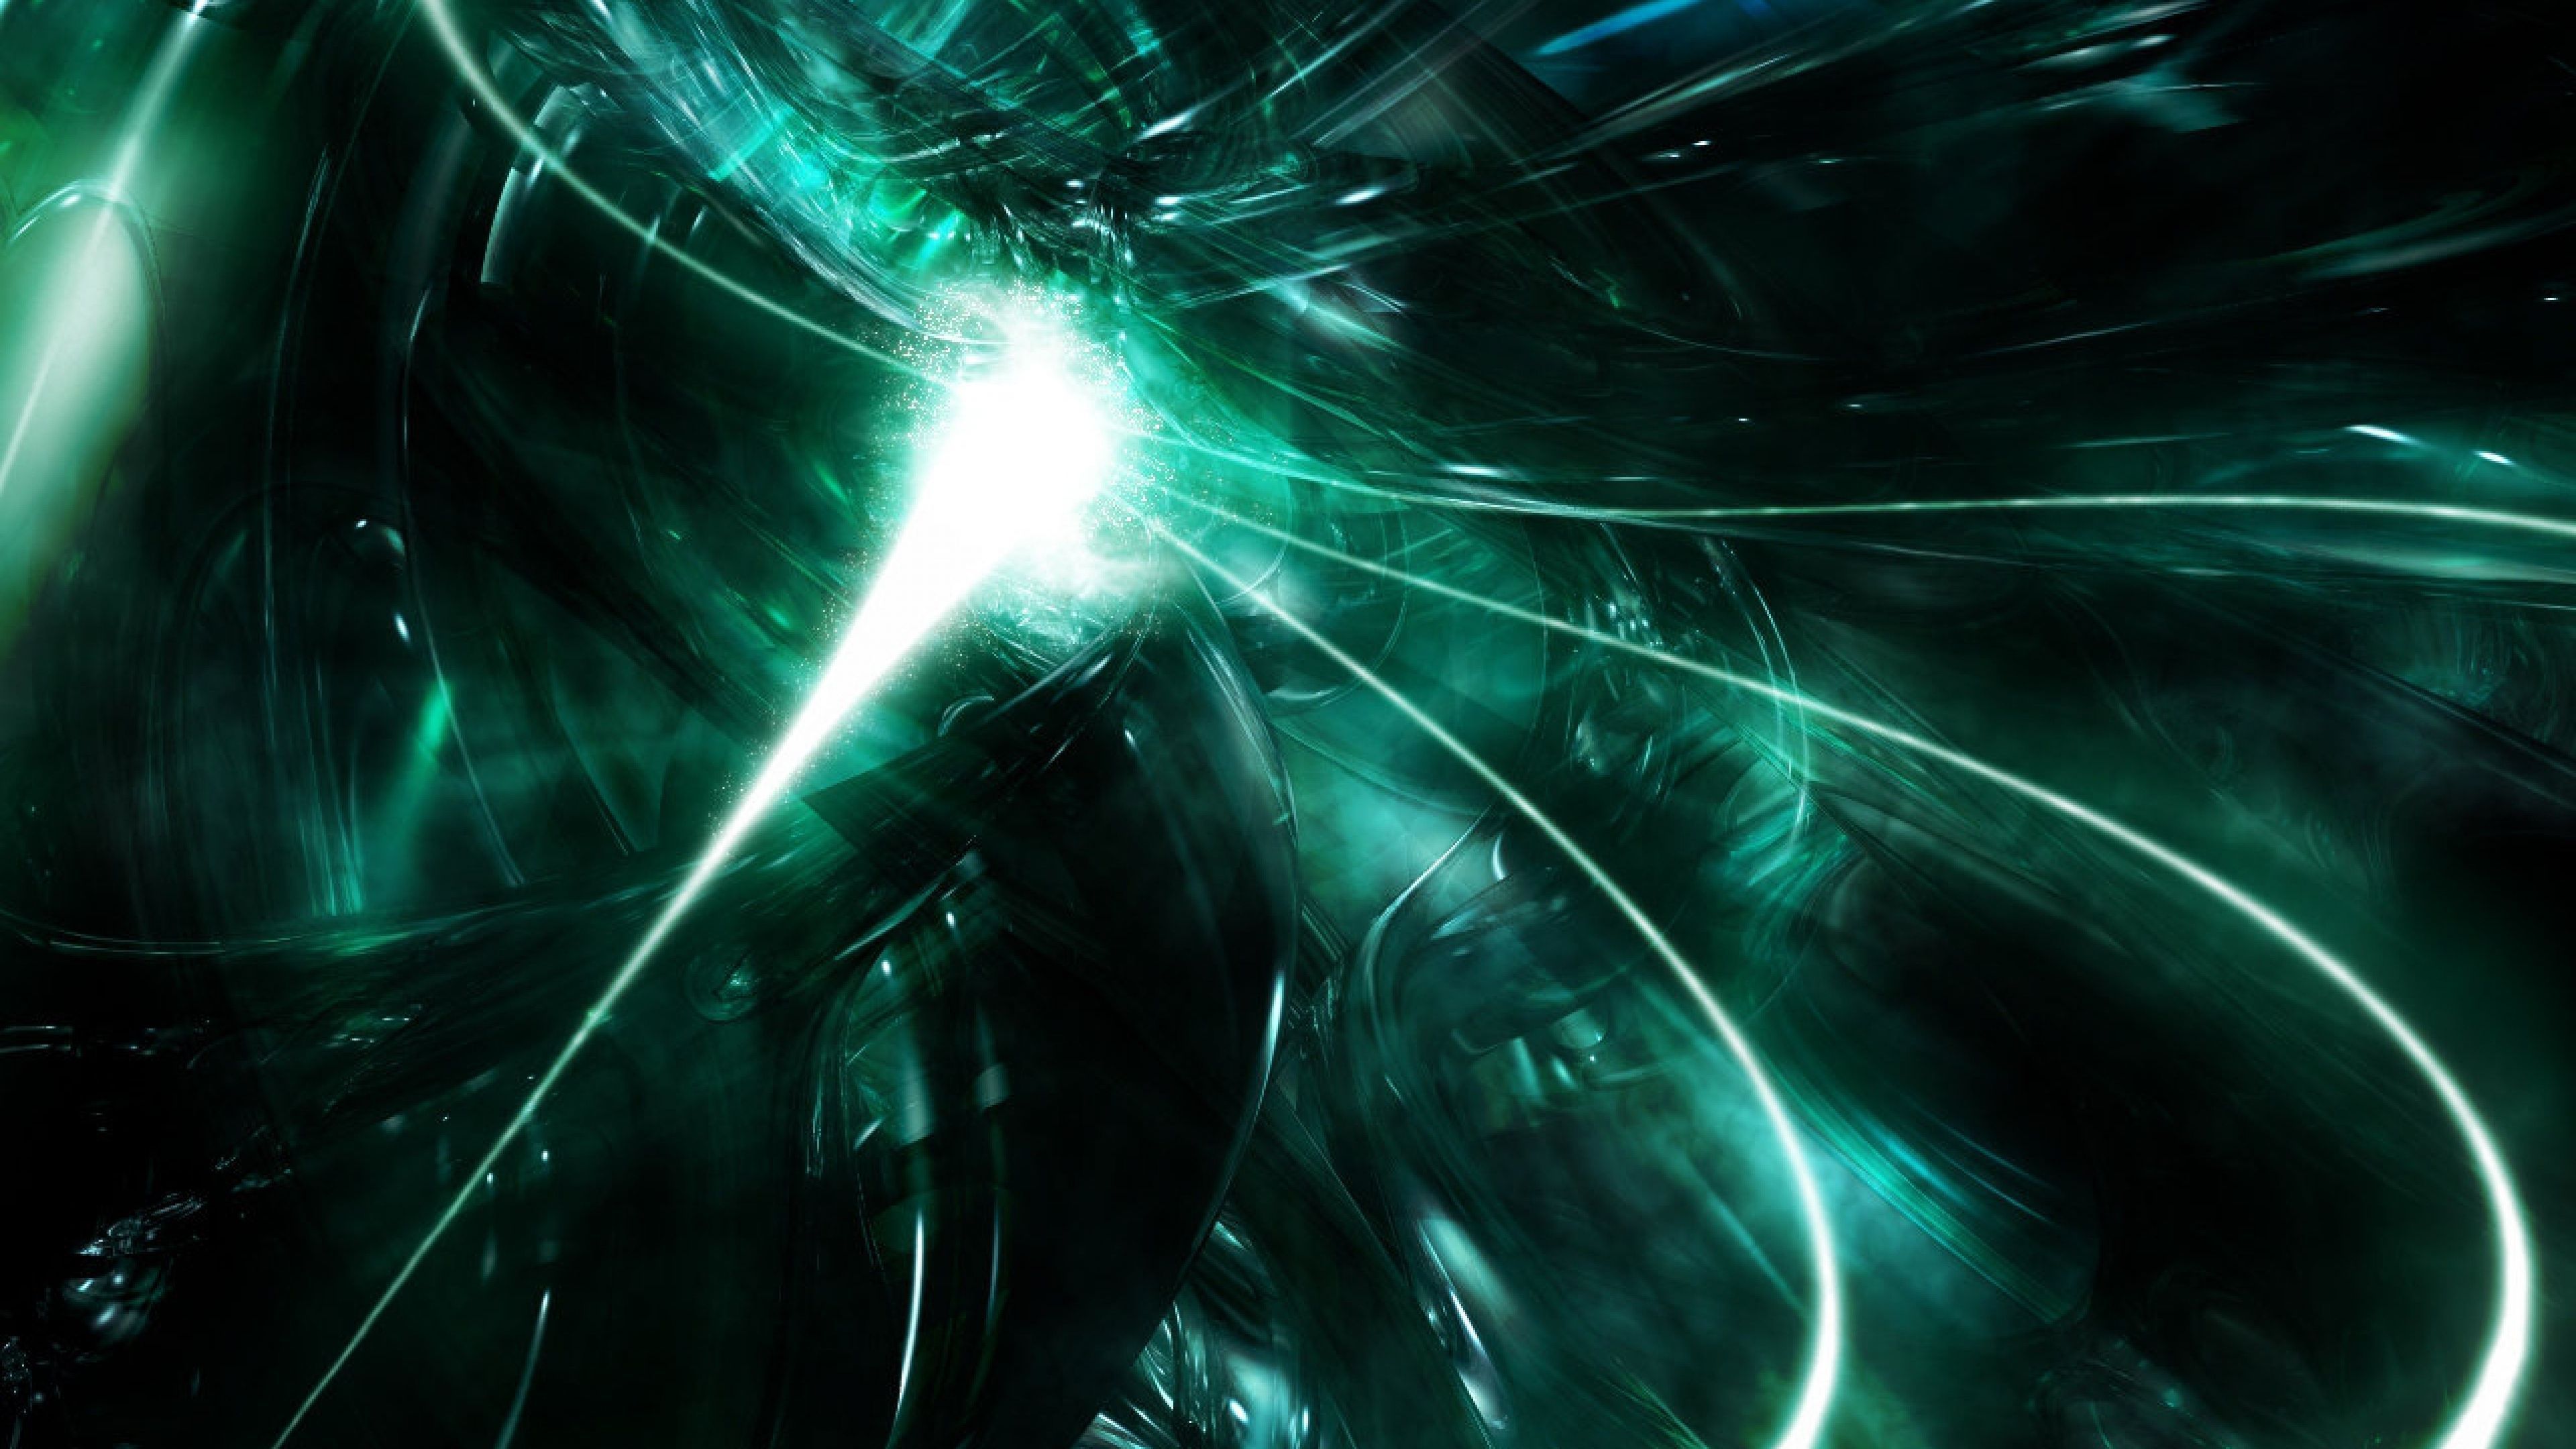 Download Wallpaper 3840x2160 Abstract, Black, Green, White 4K